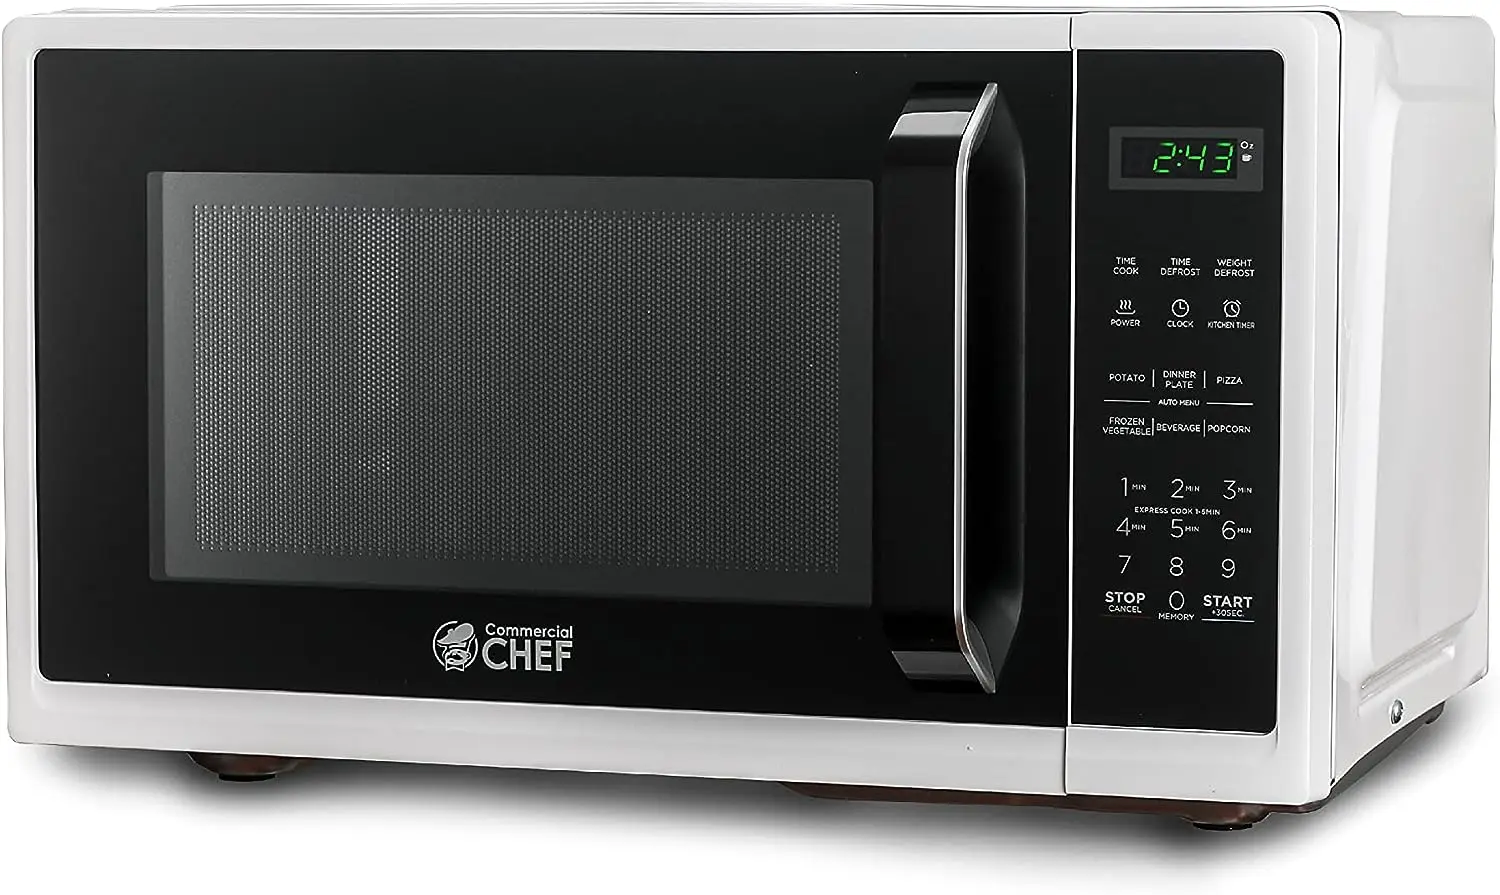 

CHEF Small Microwave 0.9 Cu. Ft. Countertop Microwave with Digital Display, White Microwave & 10 Power Levels, Outstanding P